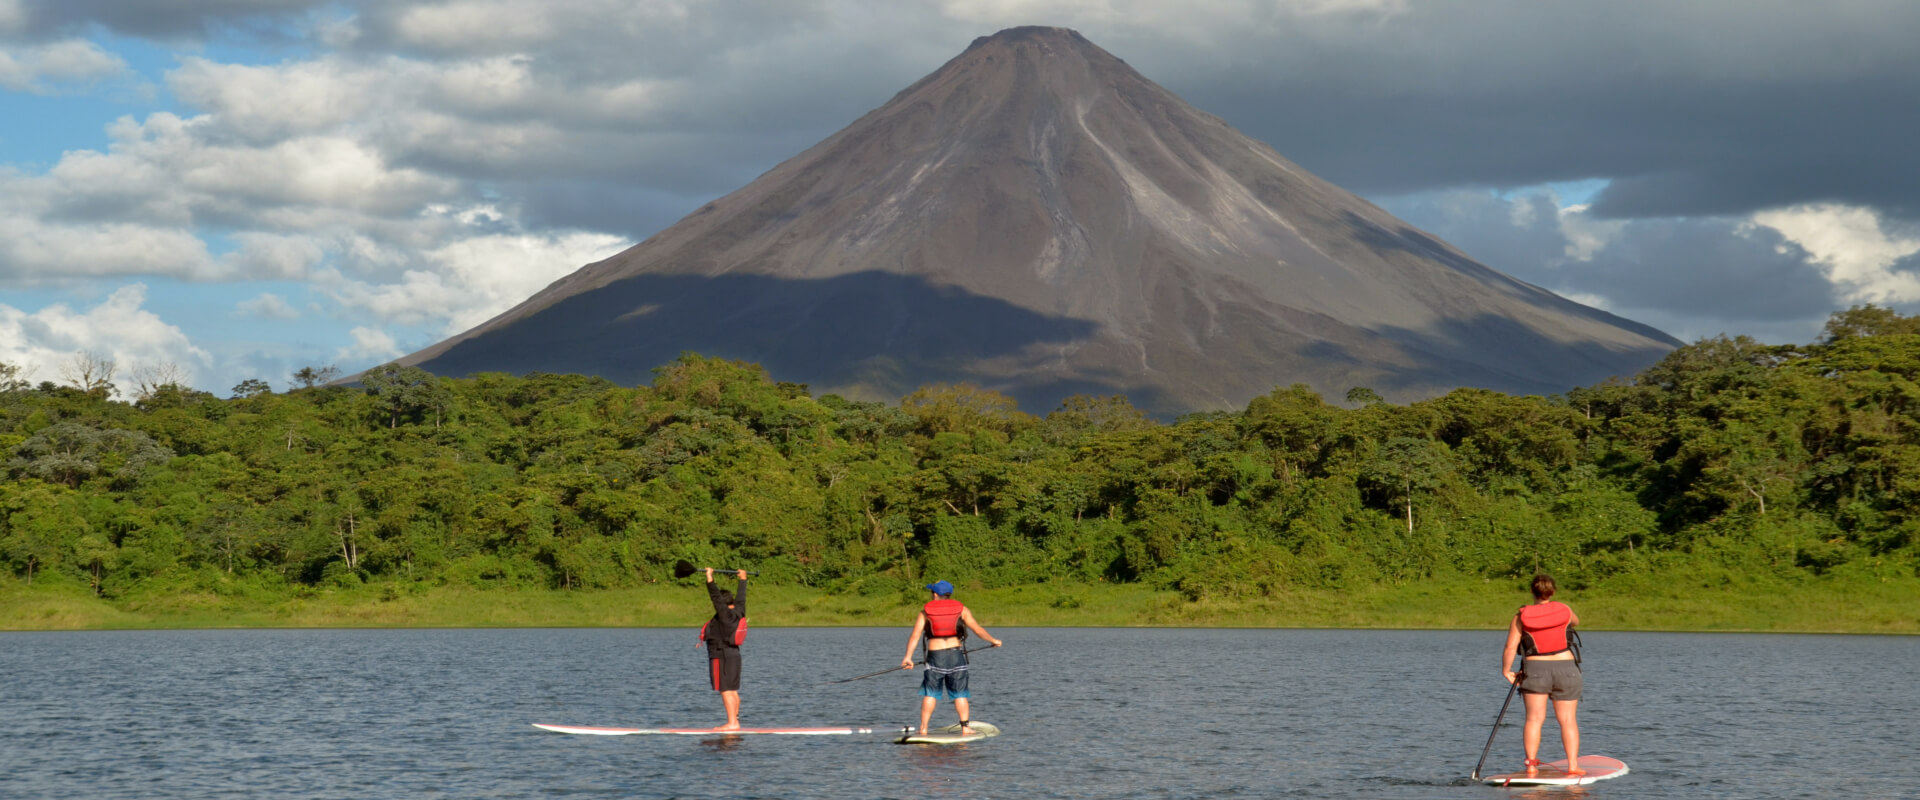 Stand Up Paddle on Lake Arenal | Costa Rica Jade Tours